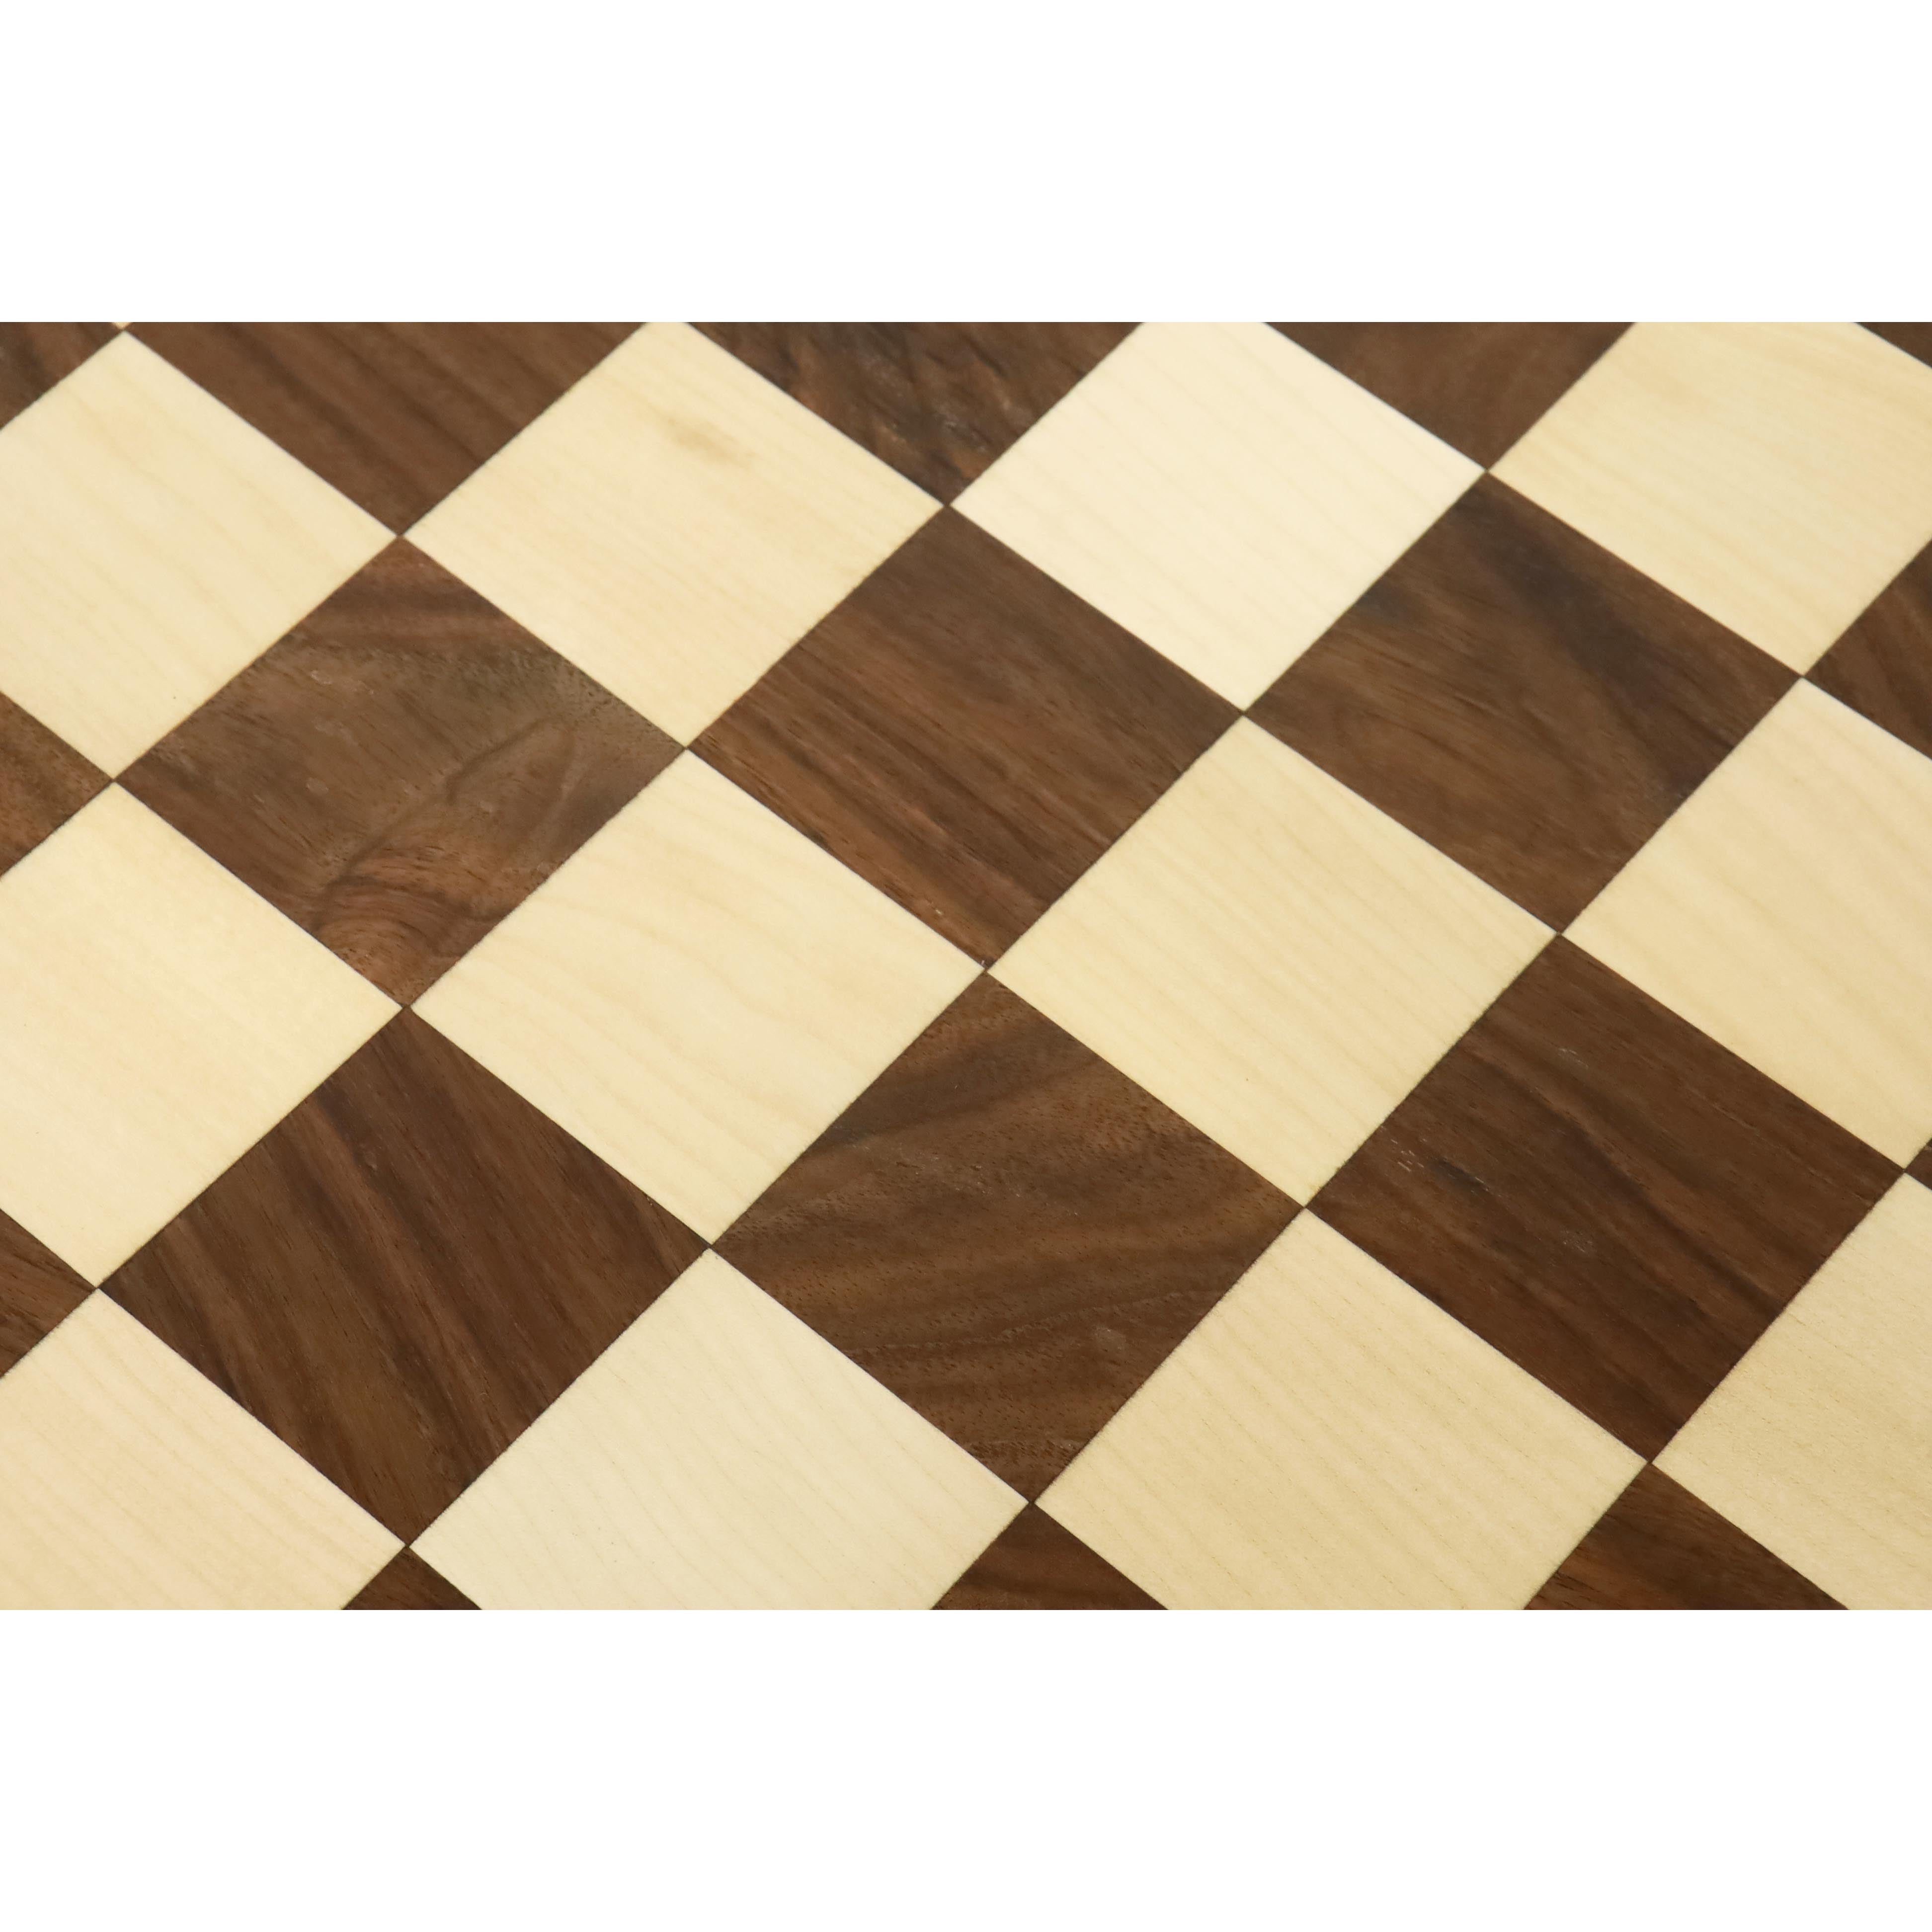 Borderless Chess board 55 mm Square Bud Rosewood & Maple -  Portugal